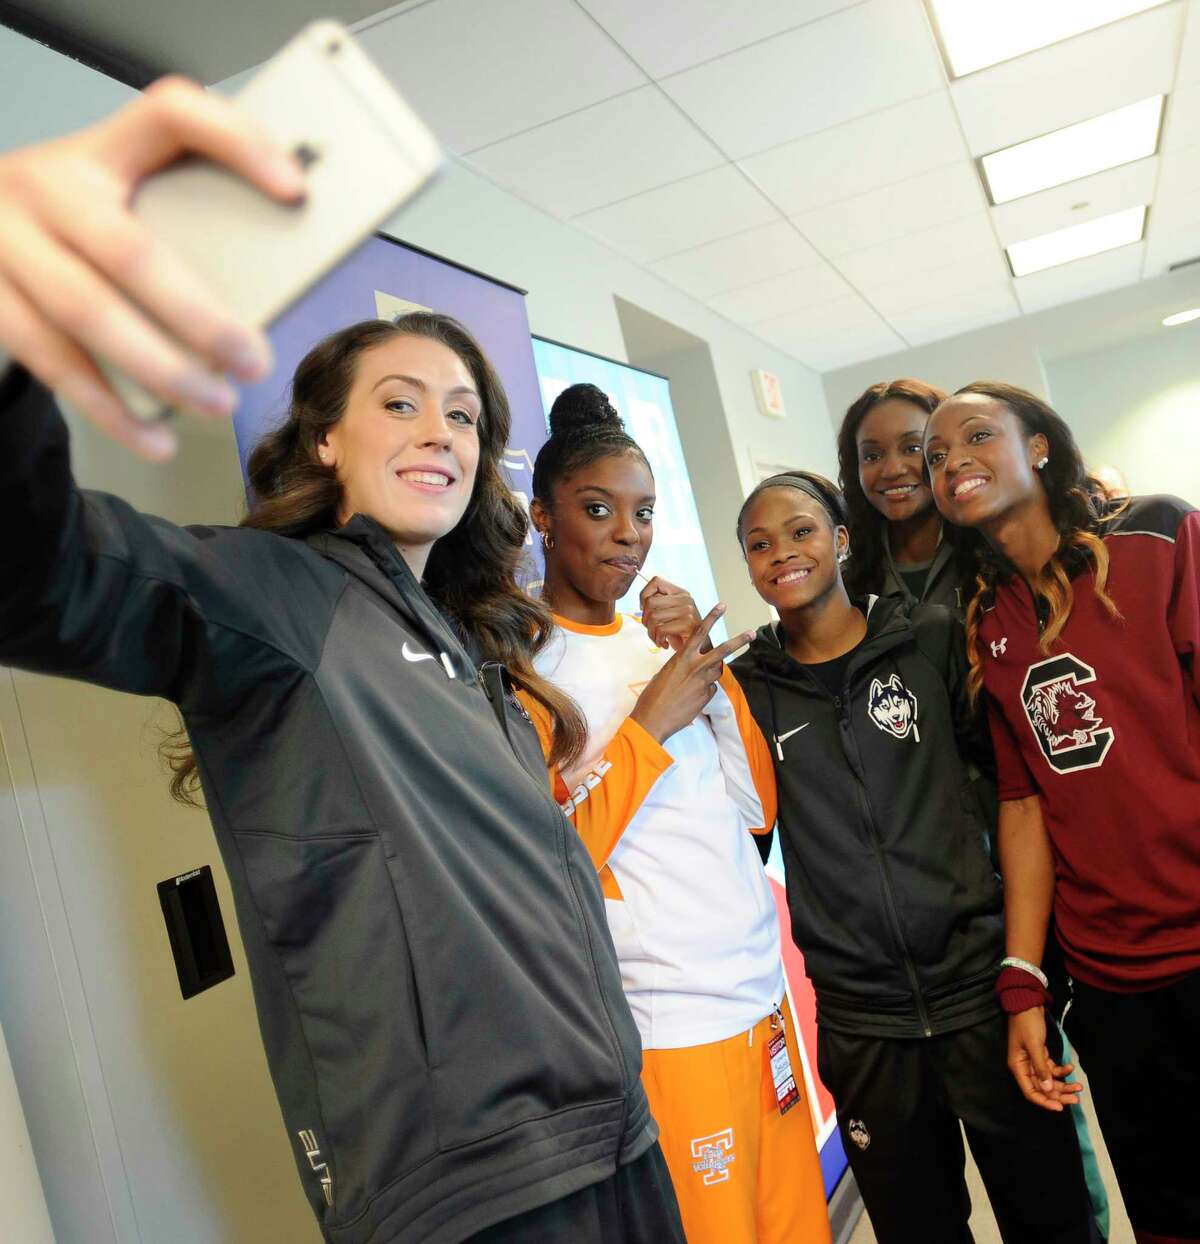 UConn’s Breanna Stewart, left, takes a photo with, from left, Tennessee’s Diamond DeShields, UConn’s Moriah Jefferson, Baylor’s Nina Davis and South Carolina’s Tiffany Mitchell during NCAA women’s basketball media day on Tuesday at ESPN in Bristol.